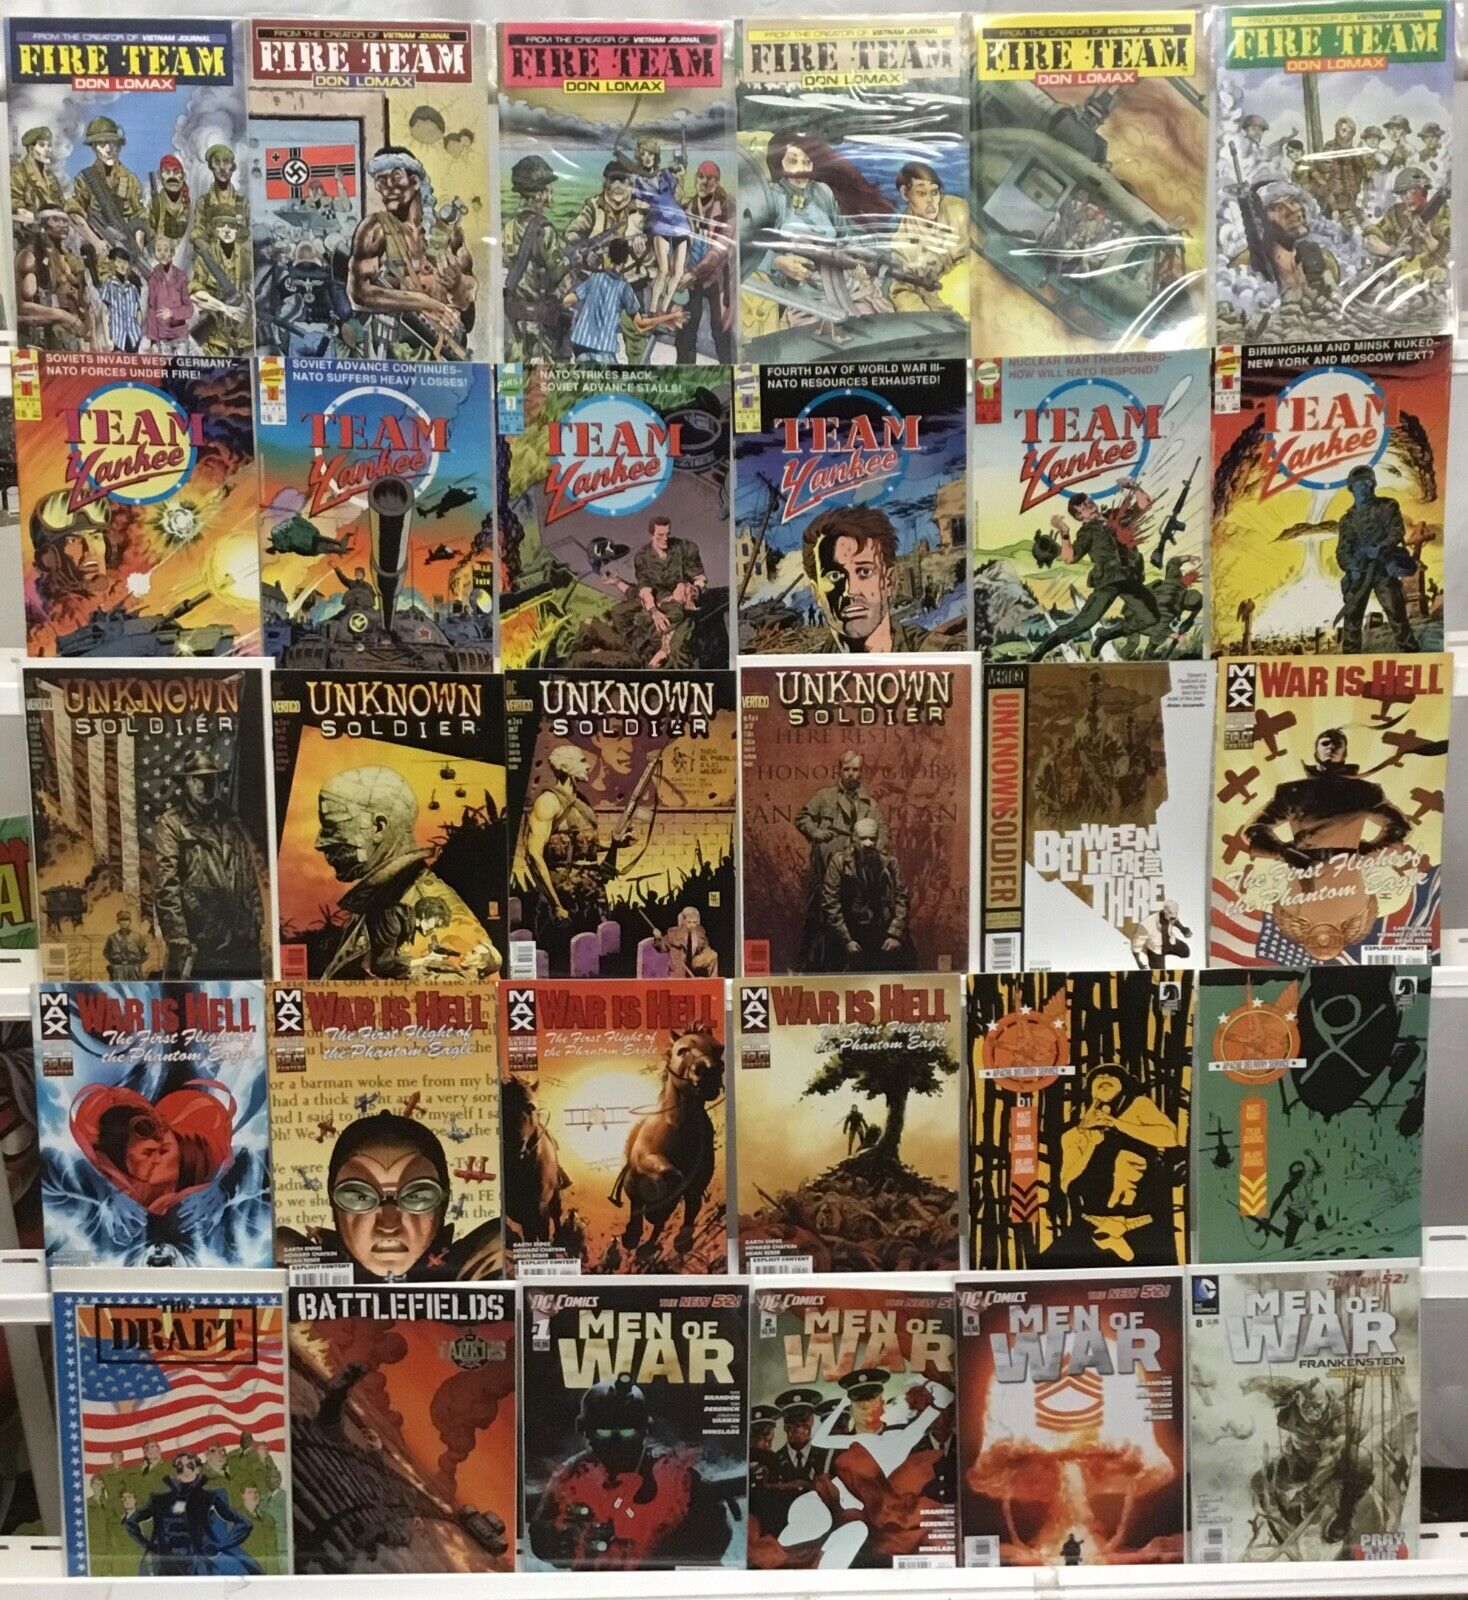 Military Comic Book Lot of 30 - Fire Team, Unknown Soldier, War is Hell, Draft